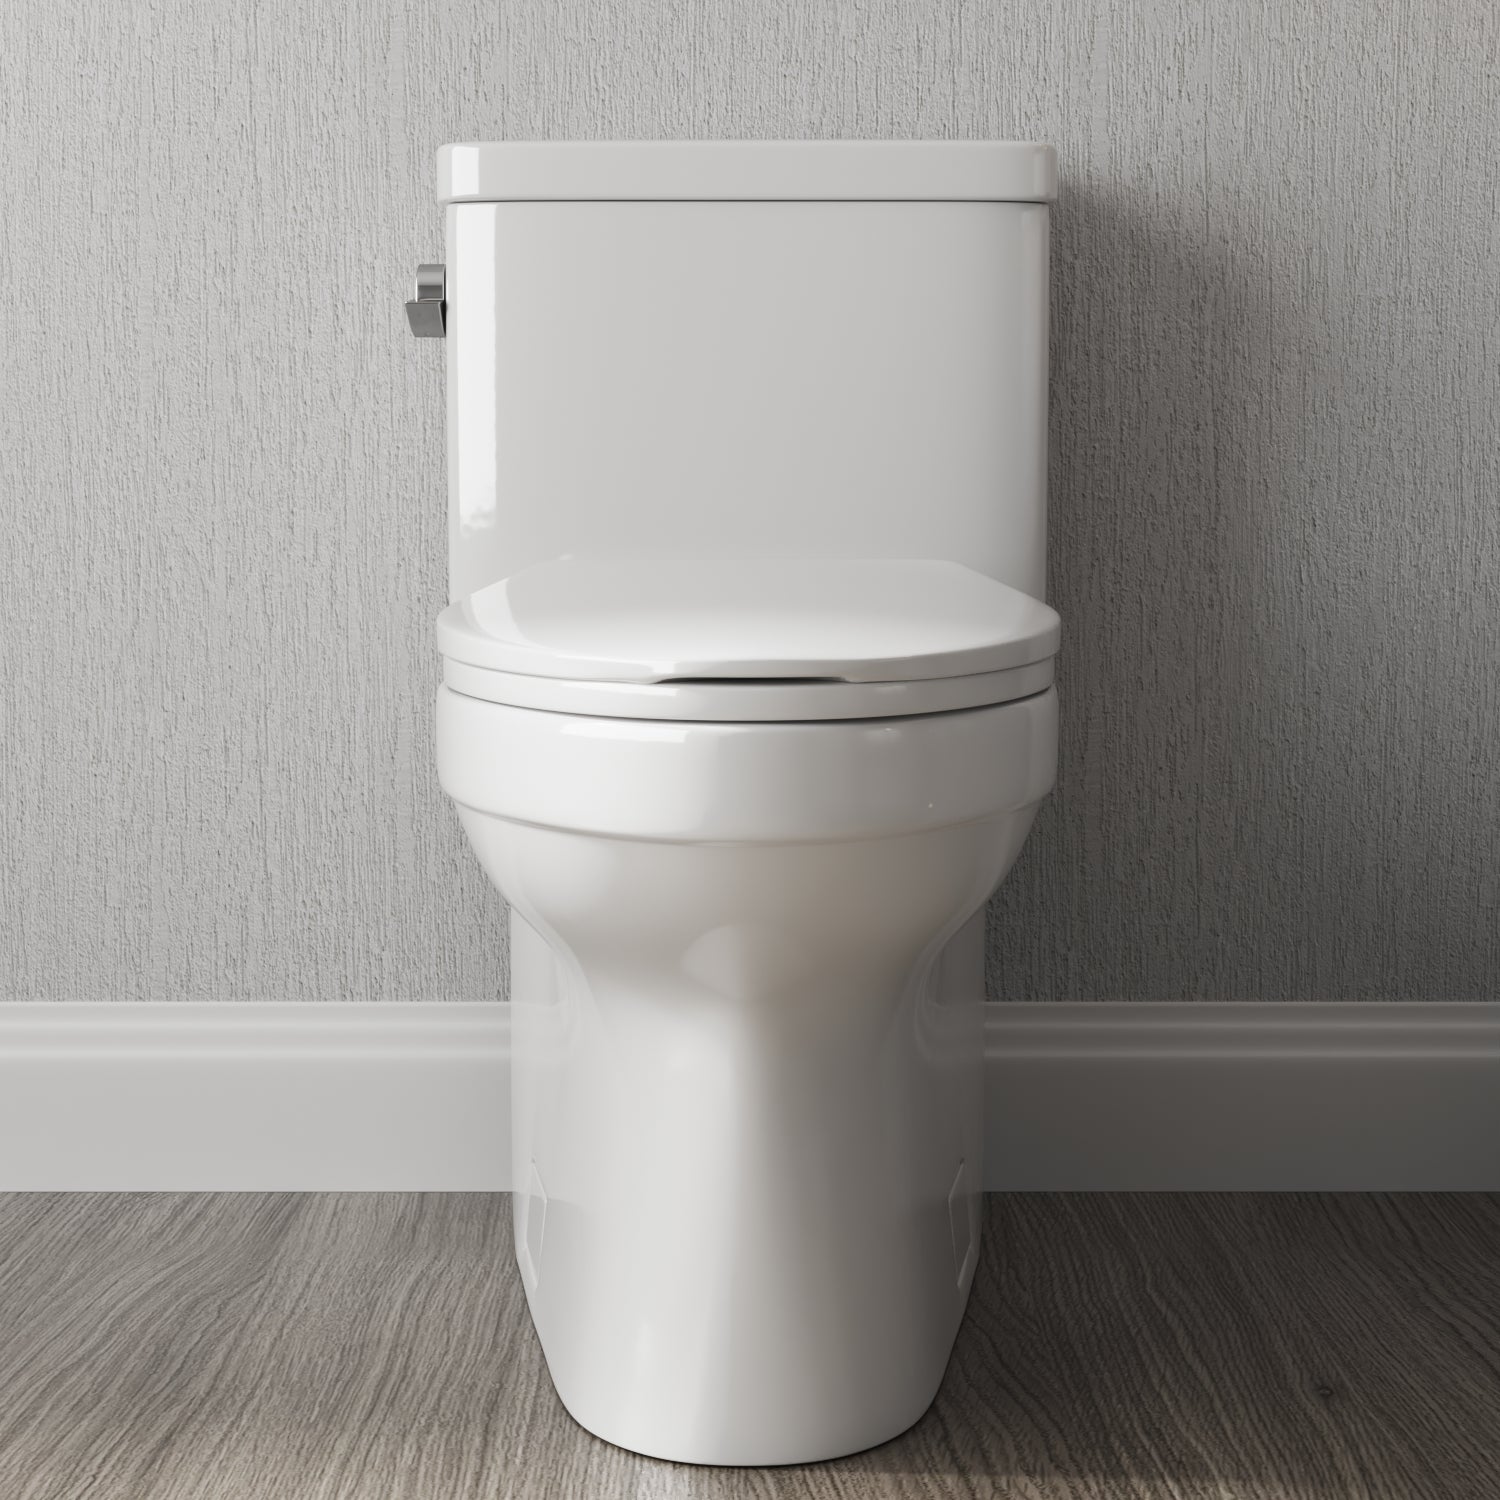 DeerValley Comfort Height Elongated Ceramic One-Piece Toilet in White - DV-1F52828